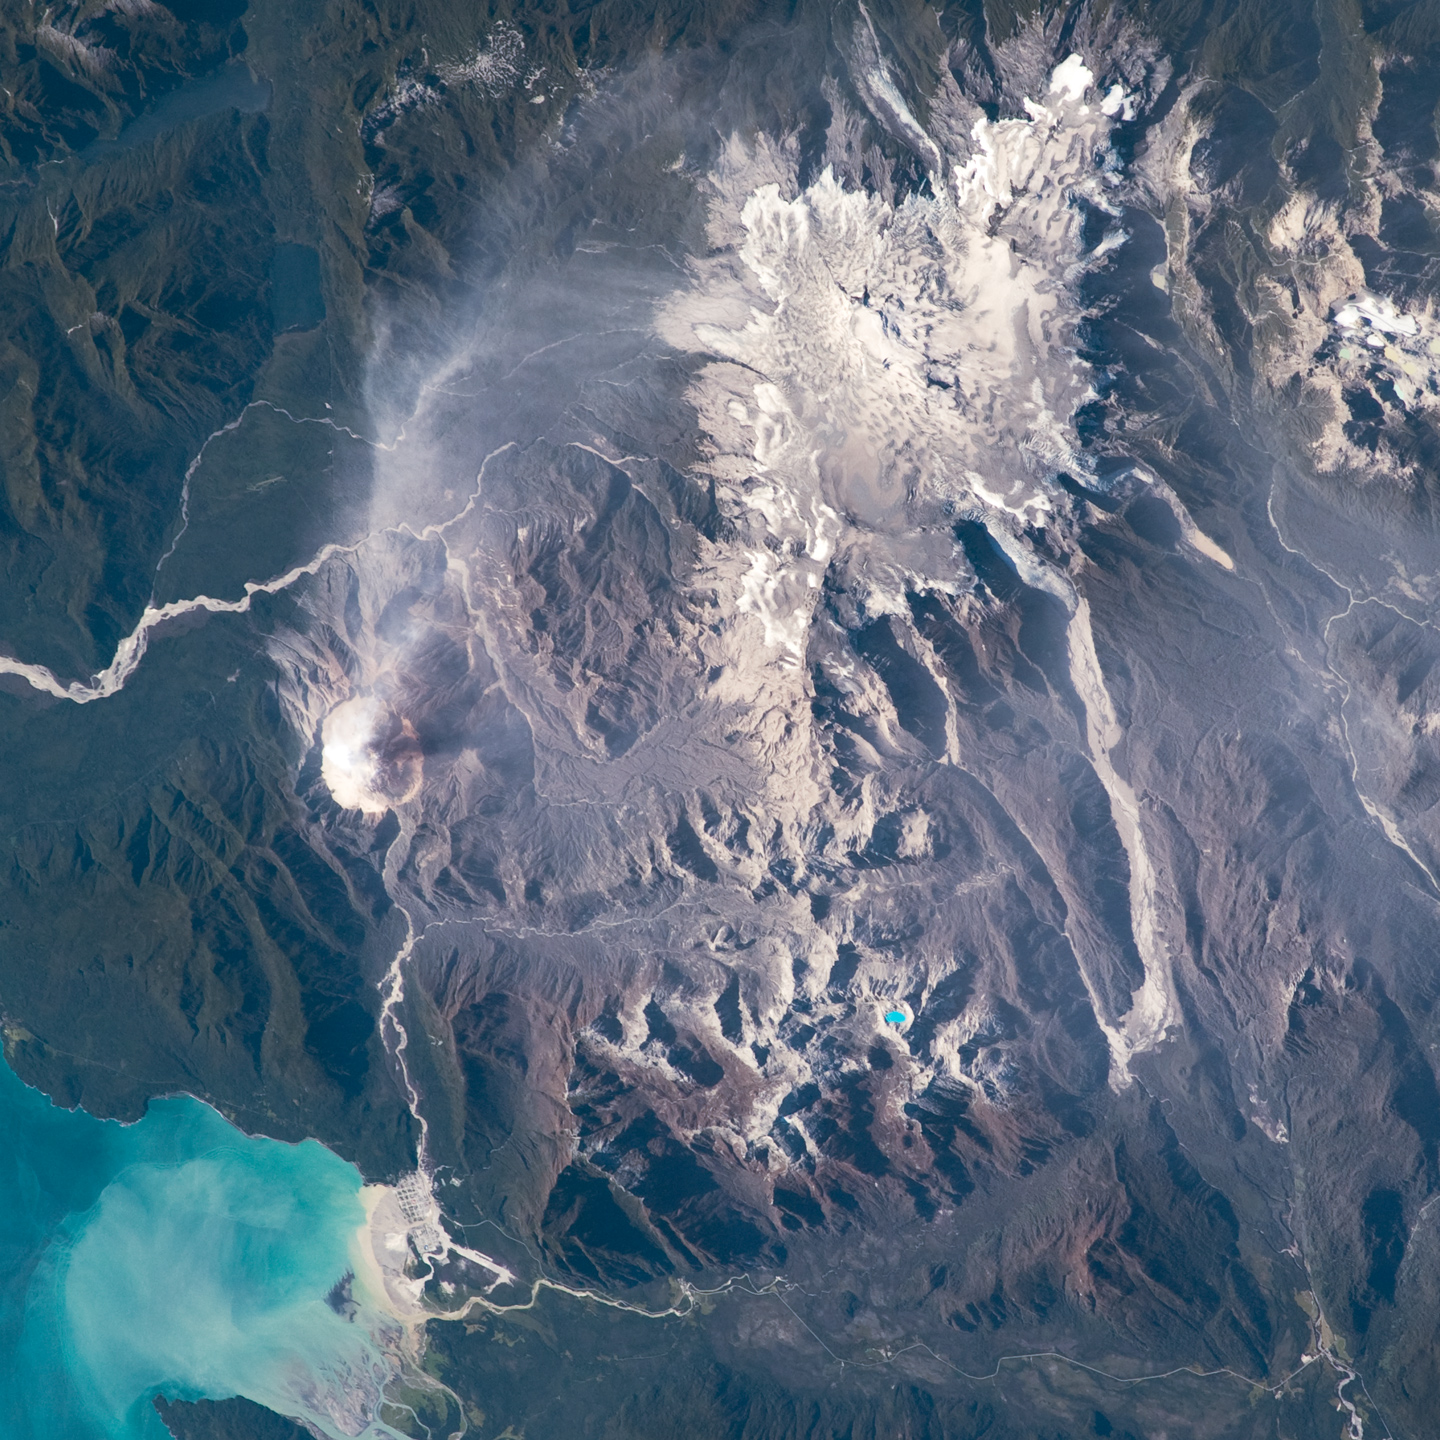 Andes Mountains Volcanoes